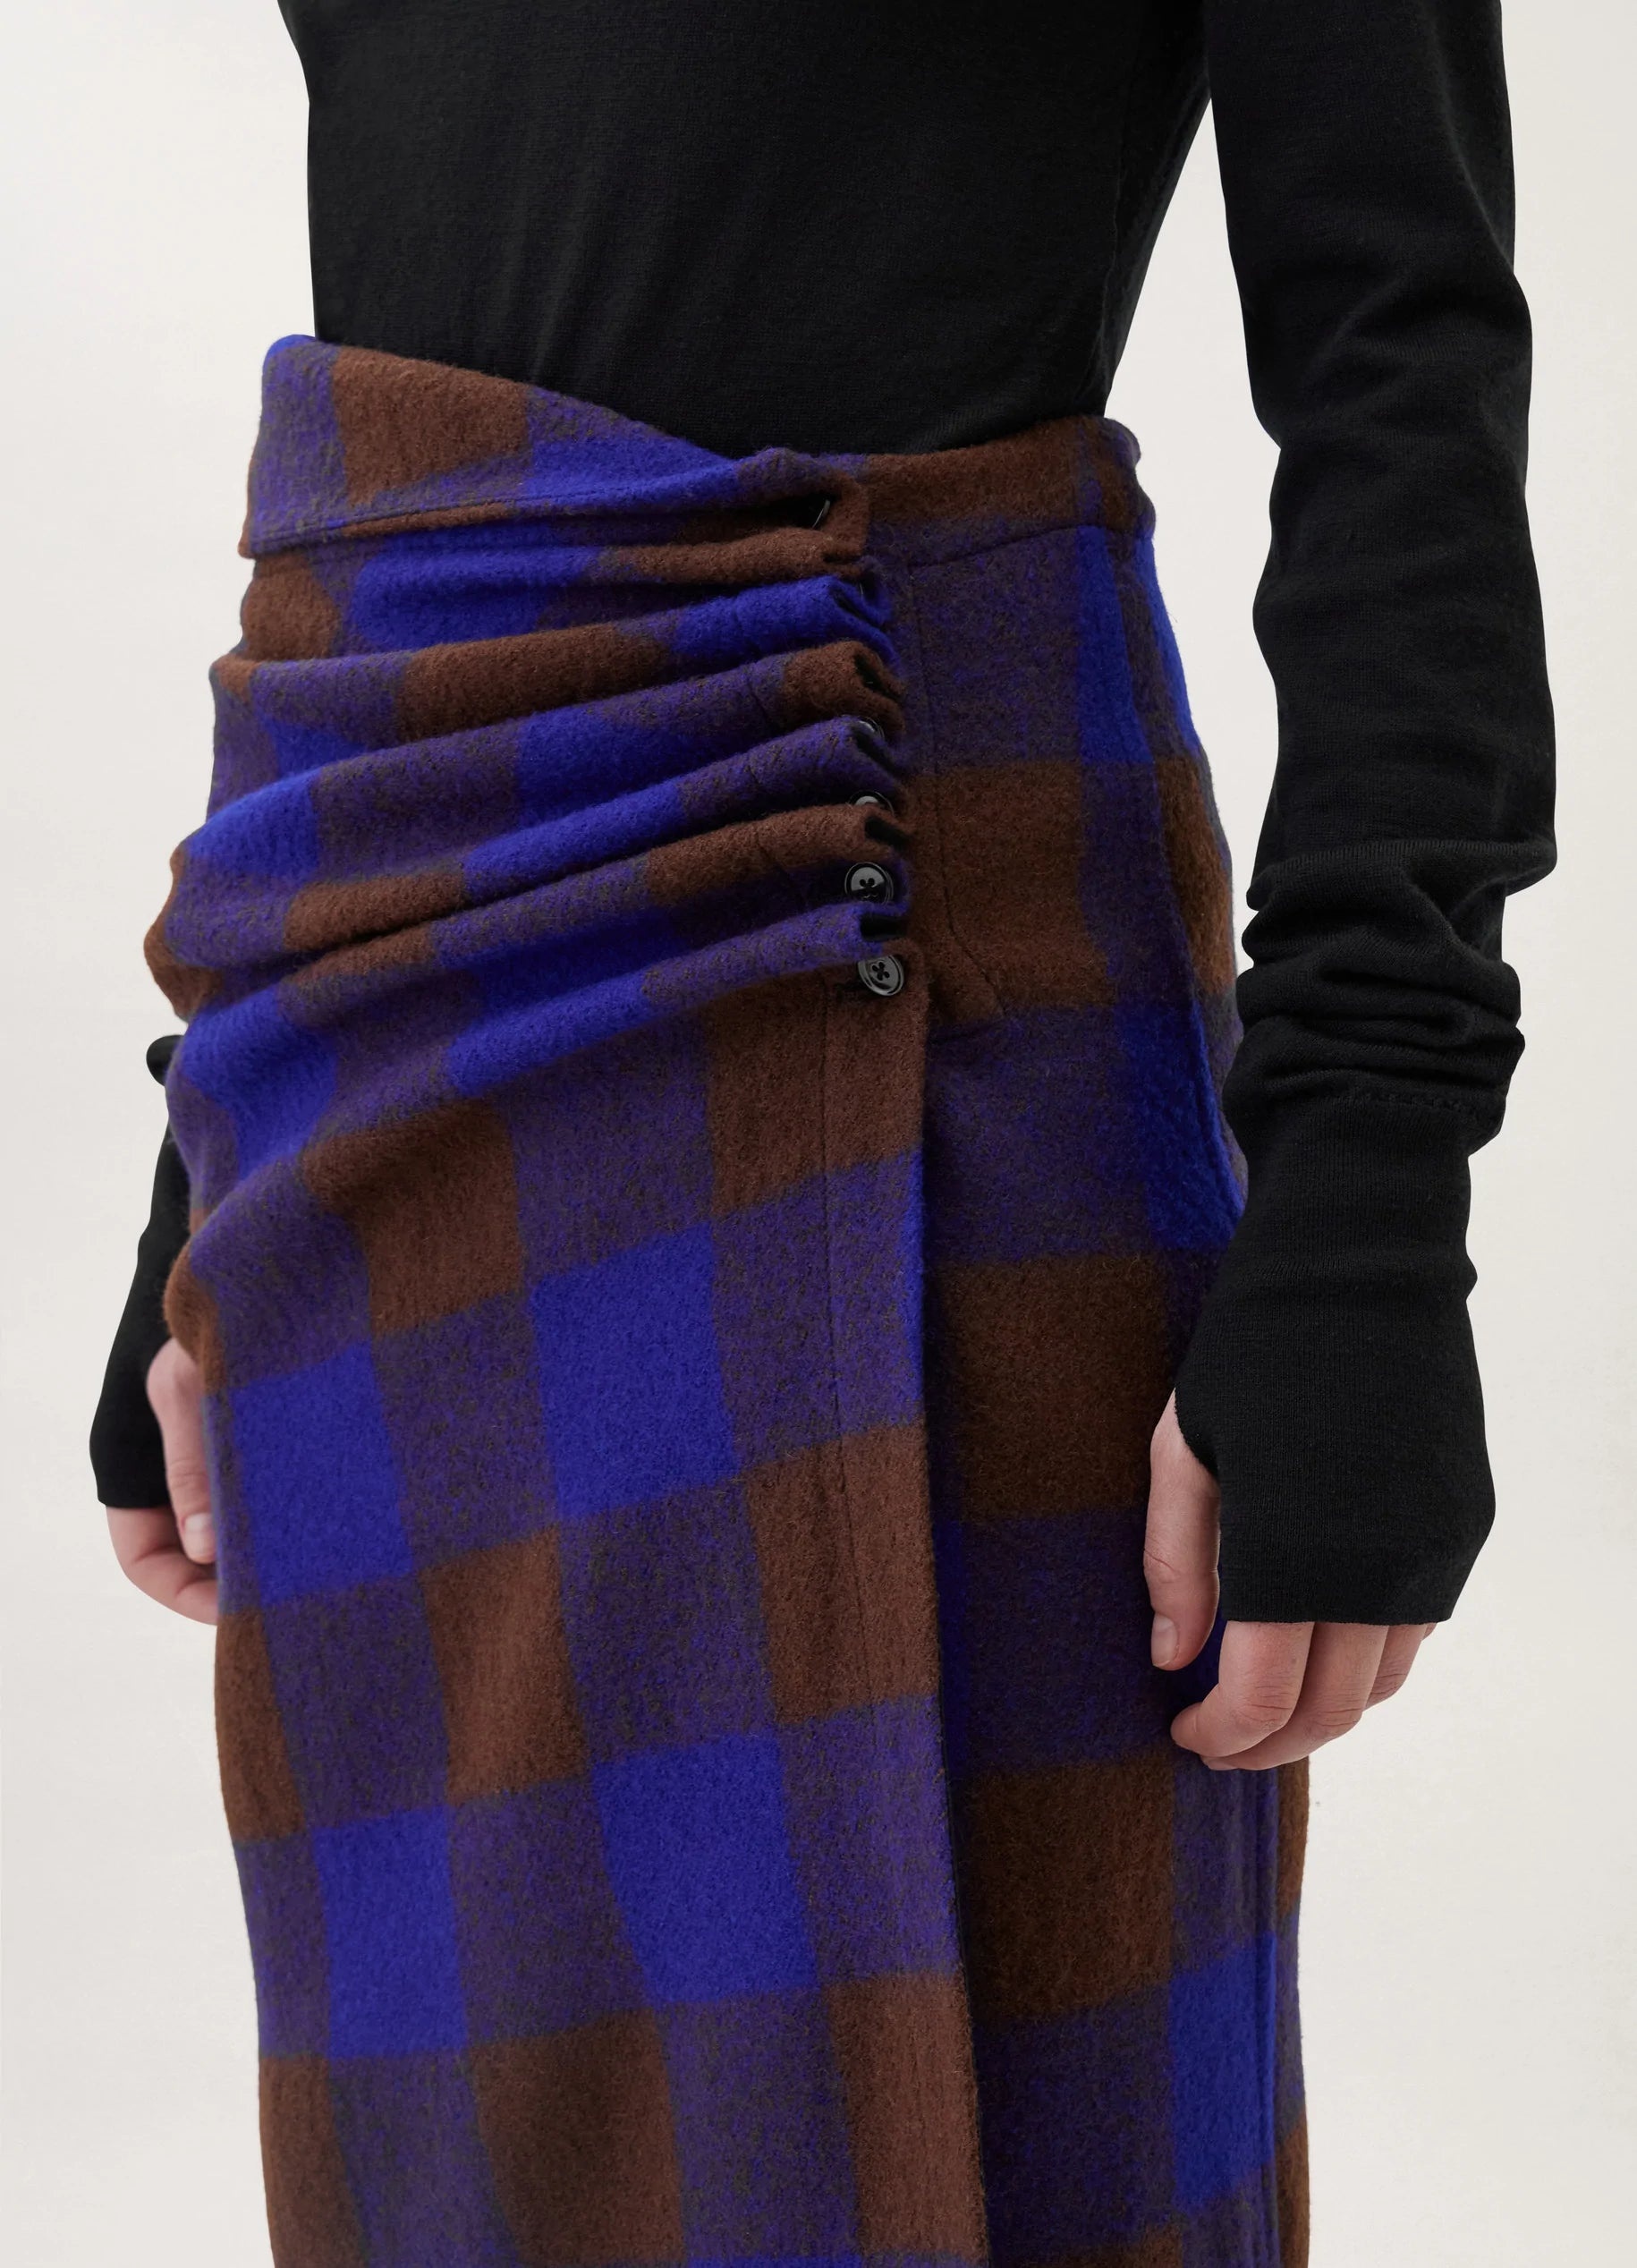 WRAP SKIRT
CHECKED WOOL - 4